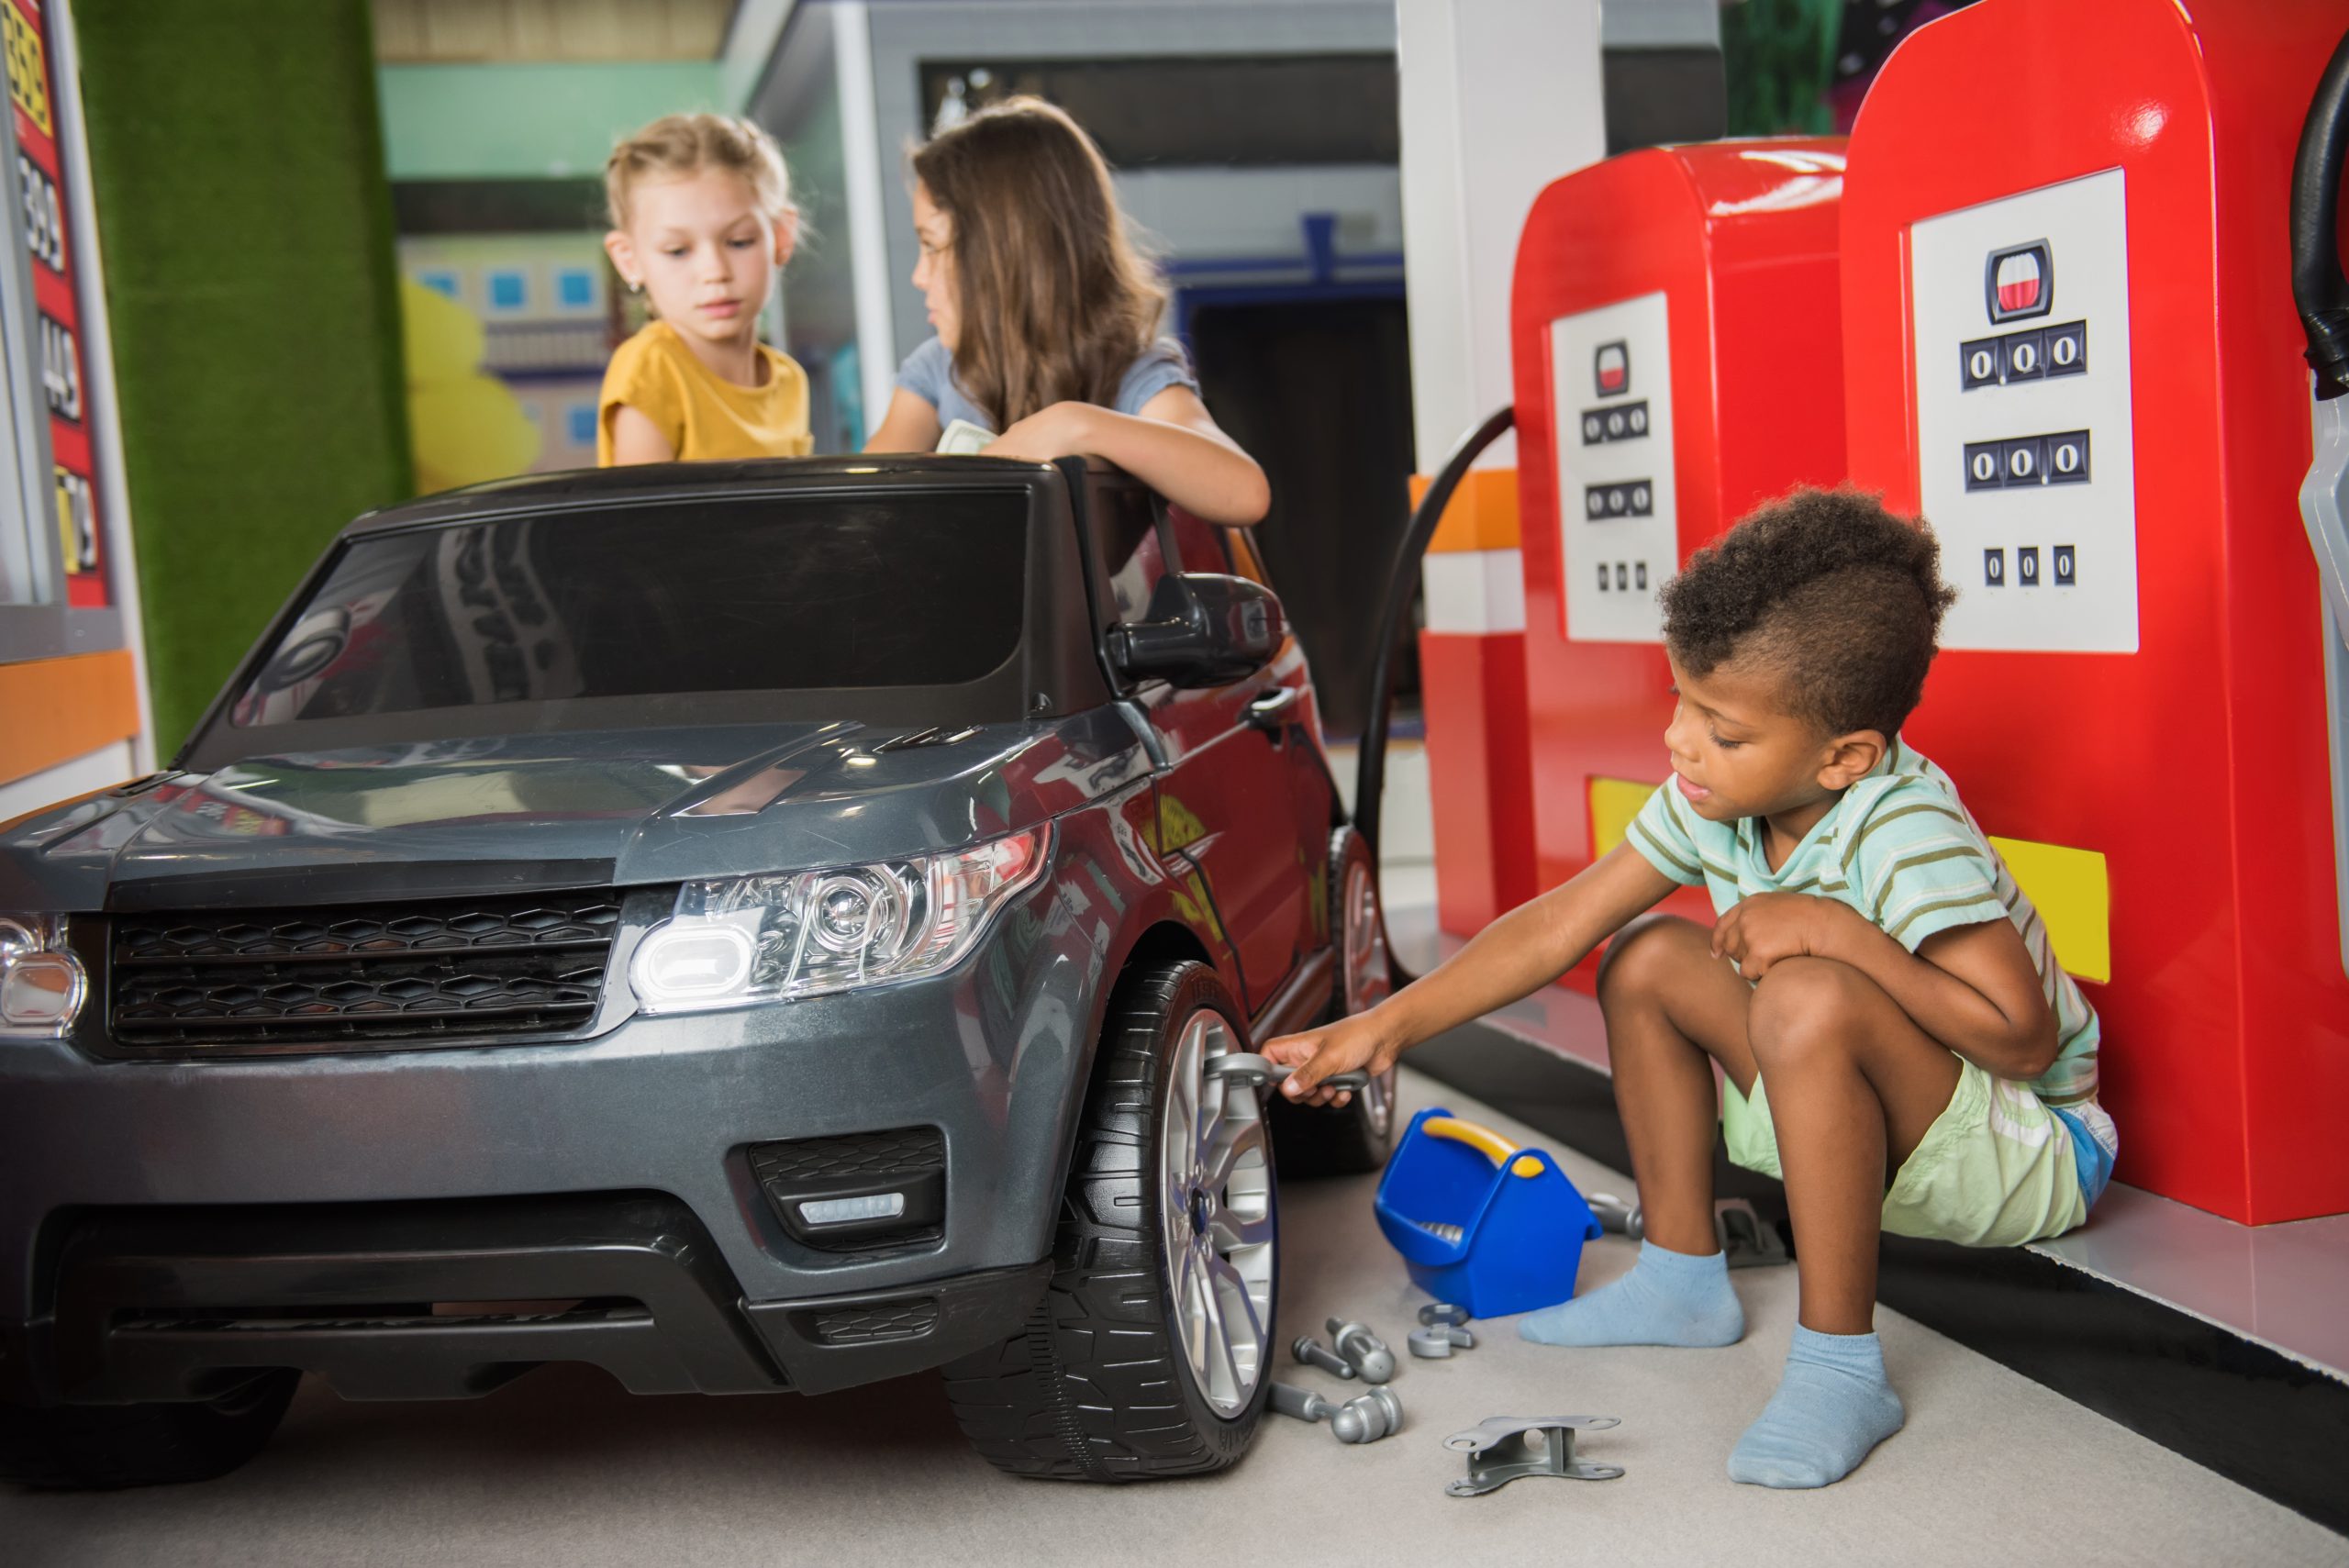 Cute little girls at car service station in playroom. Children playing gas station at entertainment center. Kids role games.